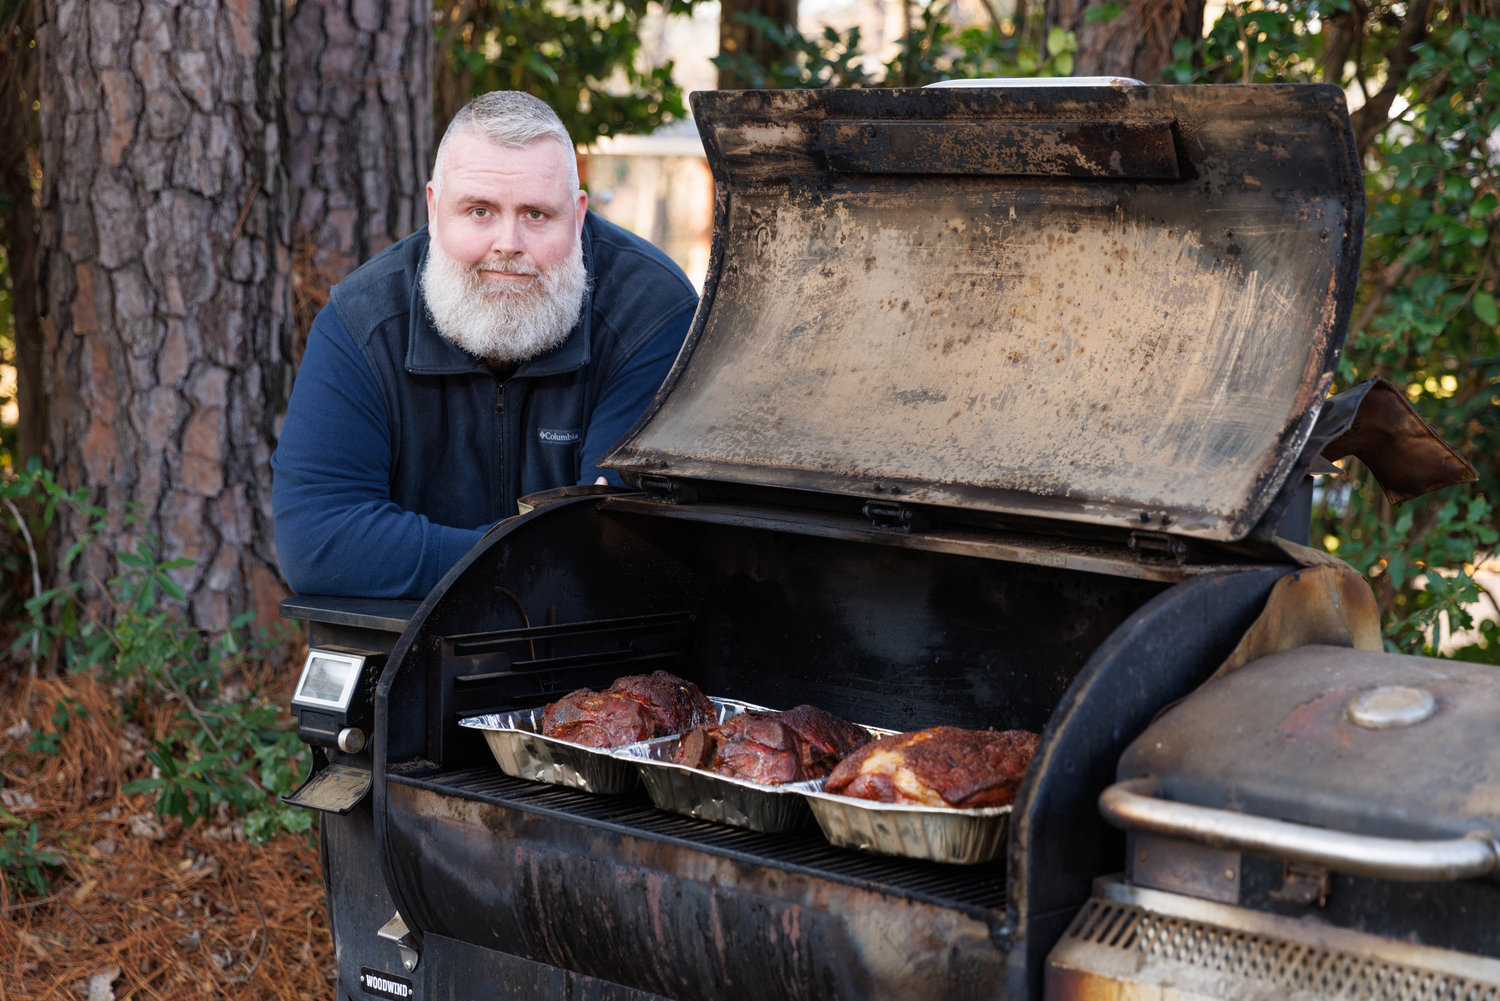 Michael Wiggins eventually found his groove using the smoker, but he says he made many mistakes along the way.